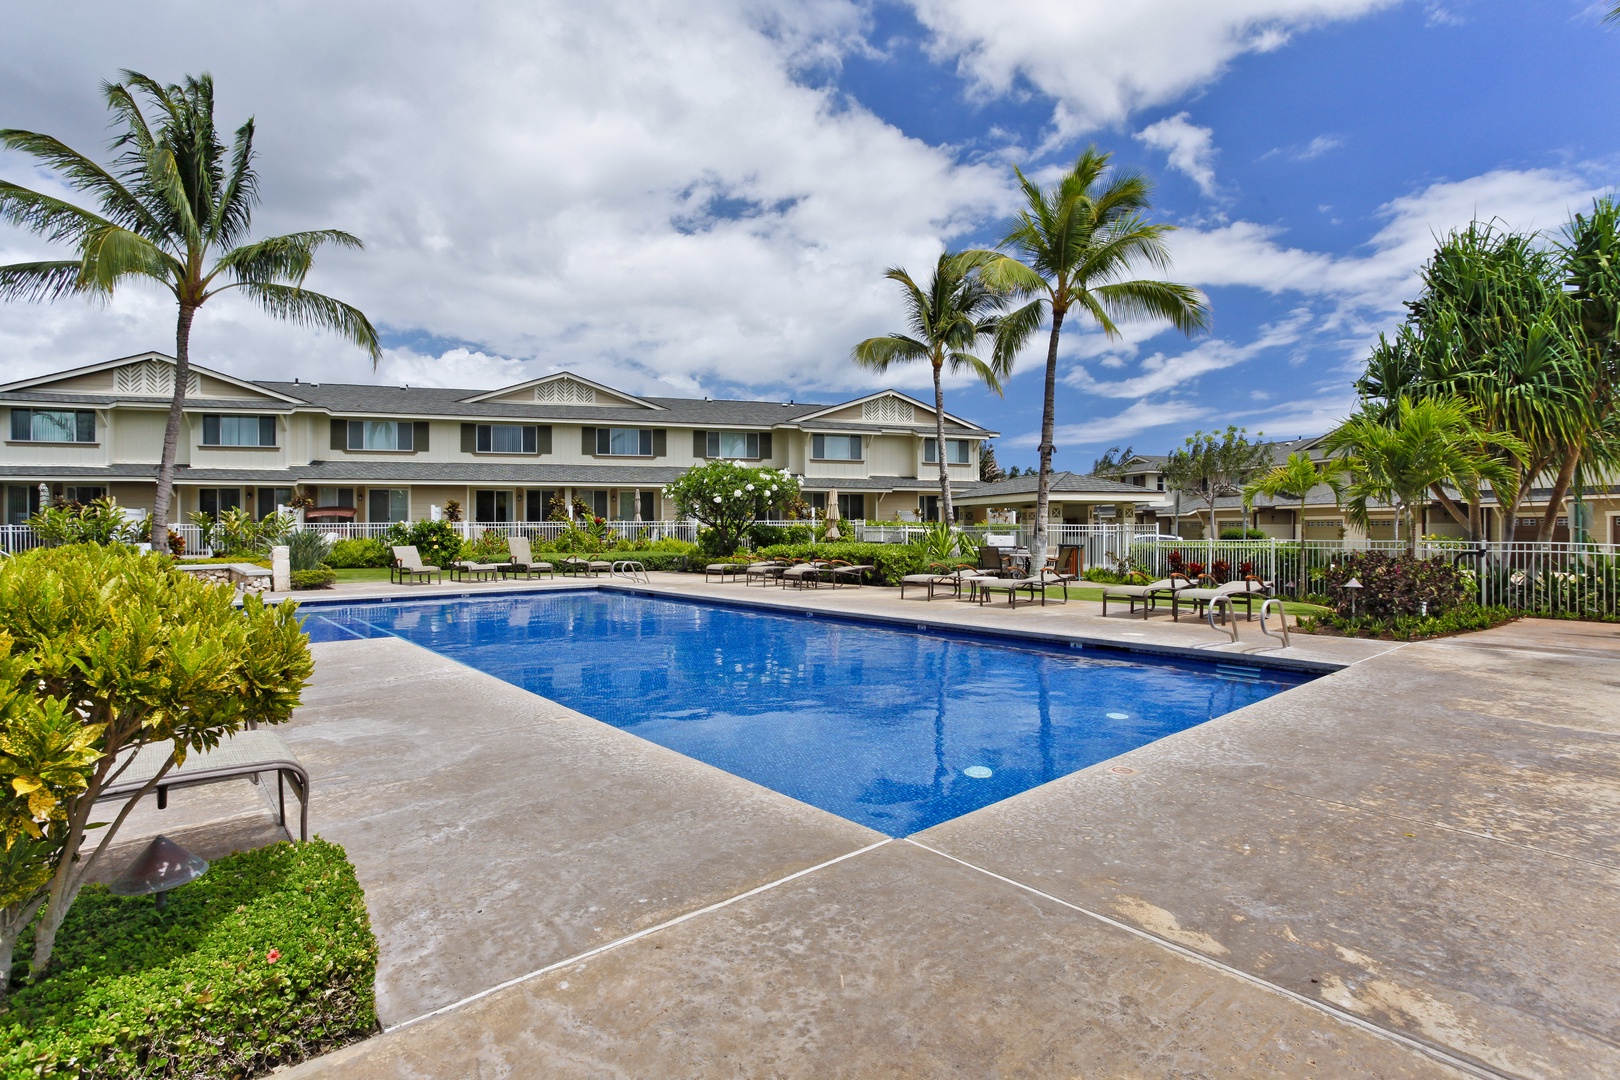 Kapolei Vacation Rentals, Hillside Villas 1538-2 - Take a dip or read your favorite book in the lounge chairs.